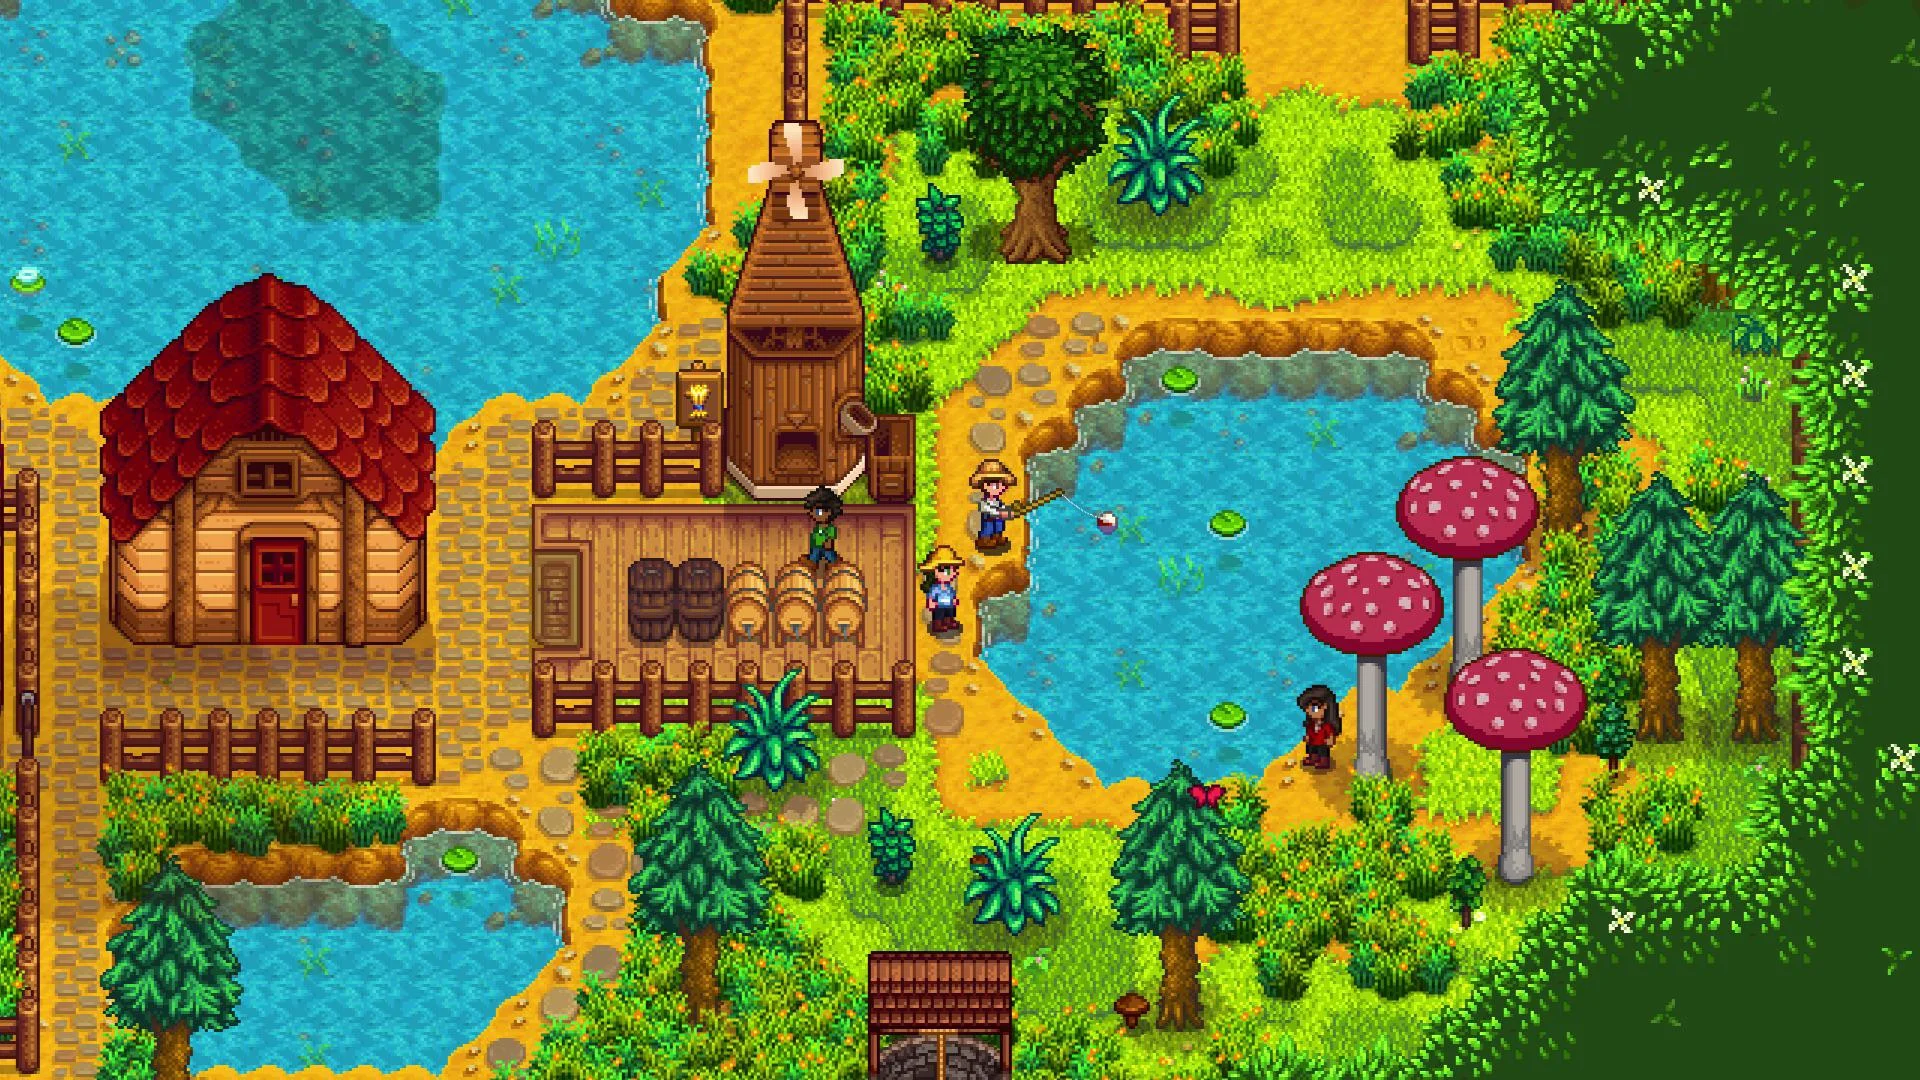 Stardew Valley Creator Shares That the Game's Title "Just Came to Me" Following the Original Name Being "Unpleasant to Say"